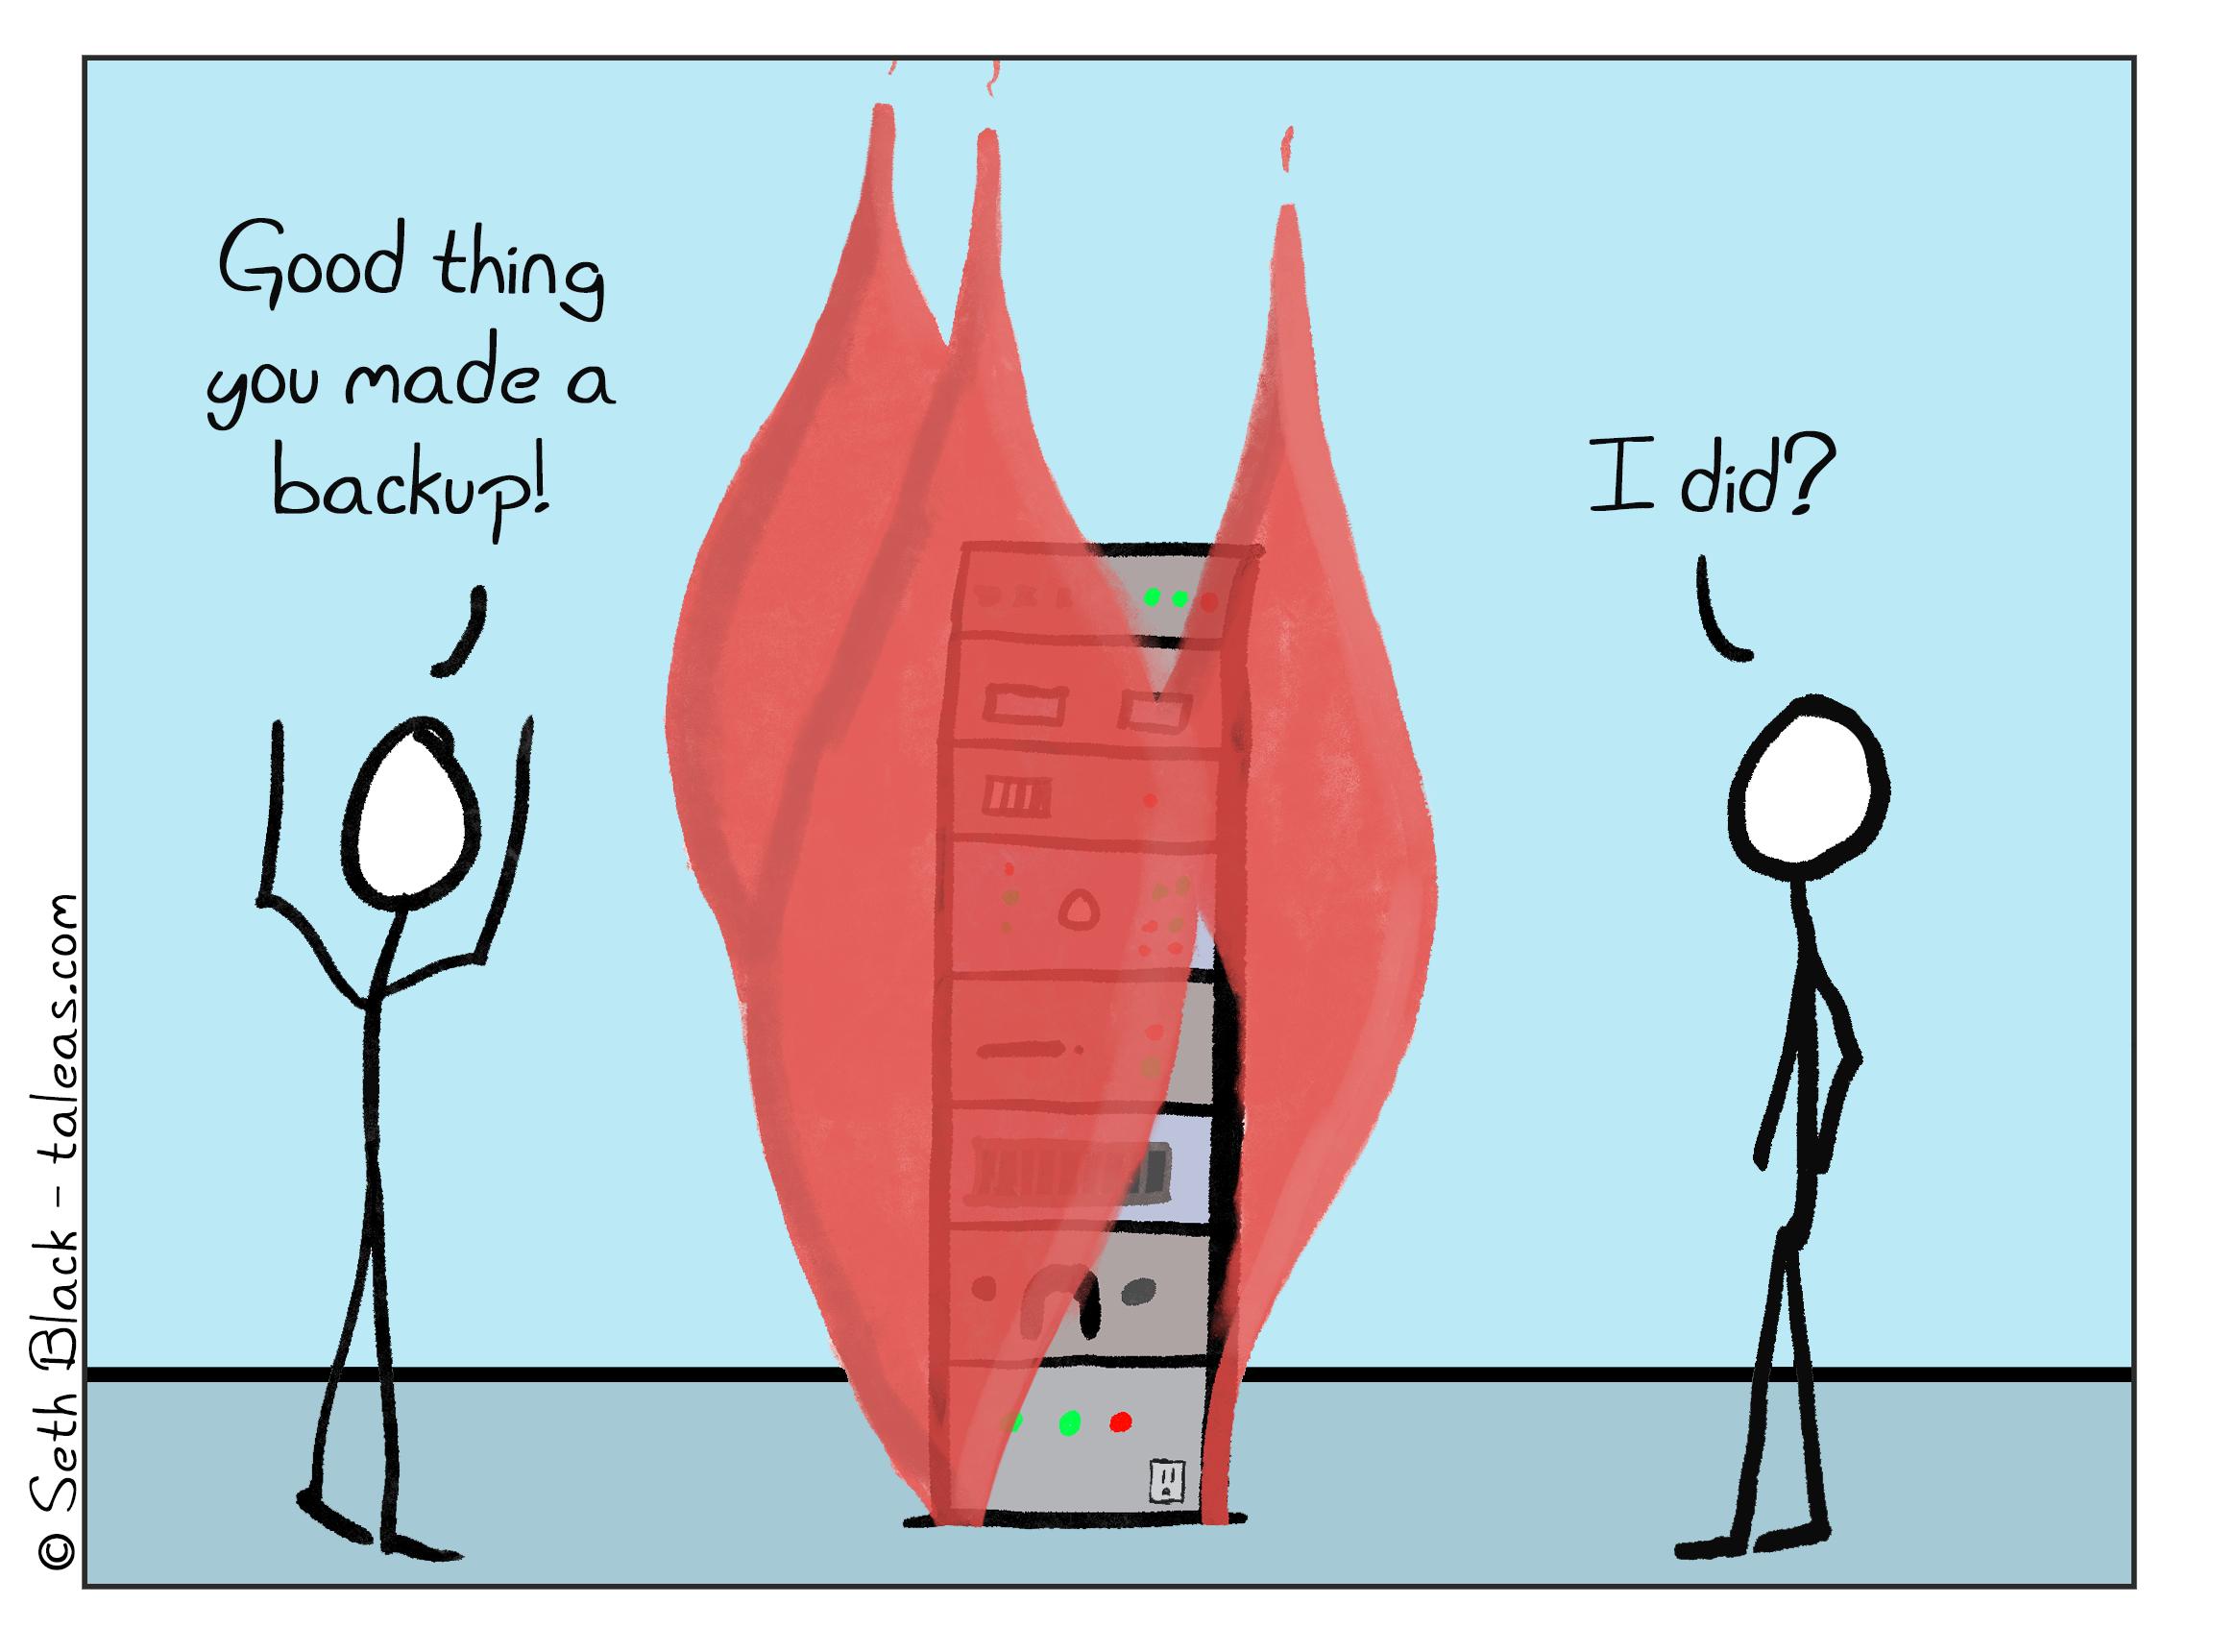 A server rack full of equipment sits in the middle of a room engulfed in flames. One stick figure, with hands raised, confidently exclaims, "Good thing you made a backup!". A second stick figure, with hands in pockets replies, "I did?"